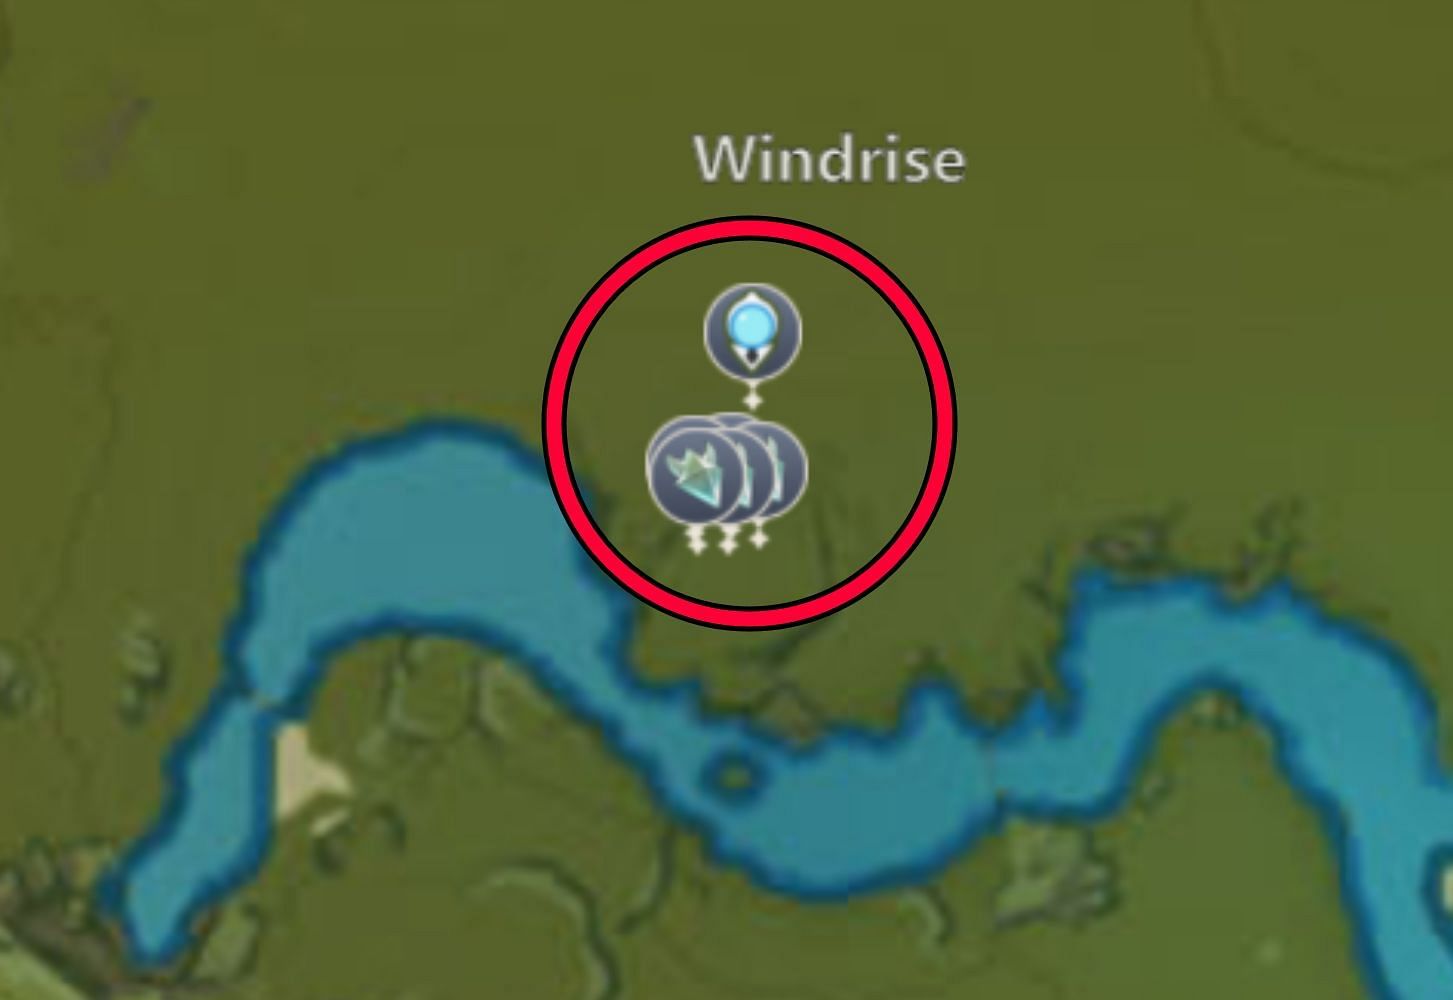 Windrise is another hugely popular spot (Image via miHoYo)